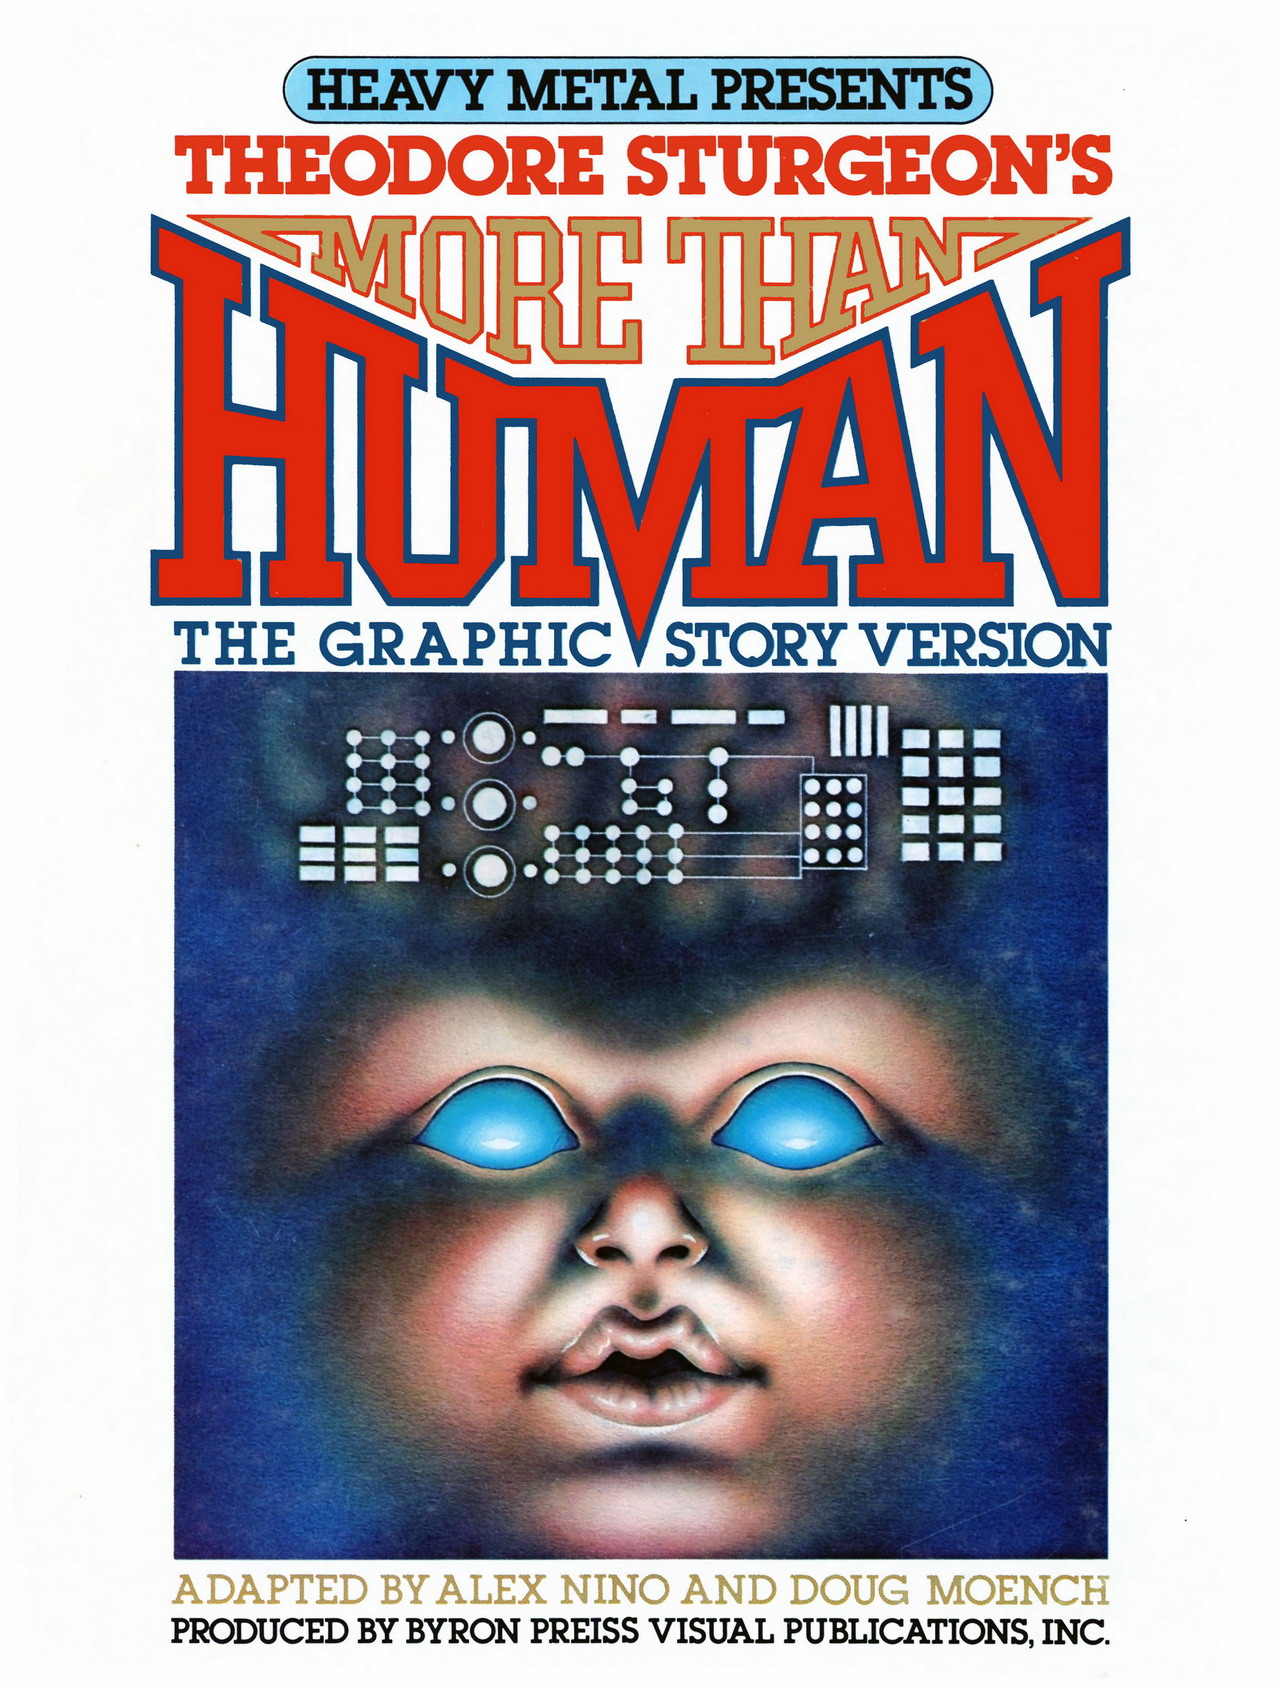 Read online Heavy Metal Presents Theodore Sturgeon's More Than Human comic -  Issue # TPB - 1